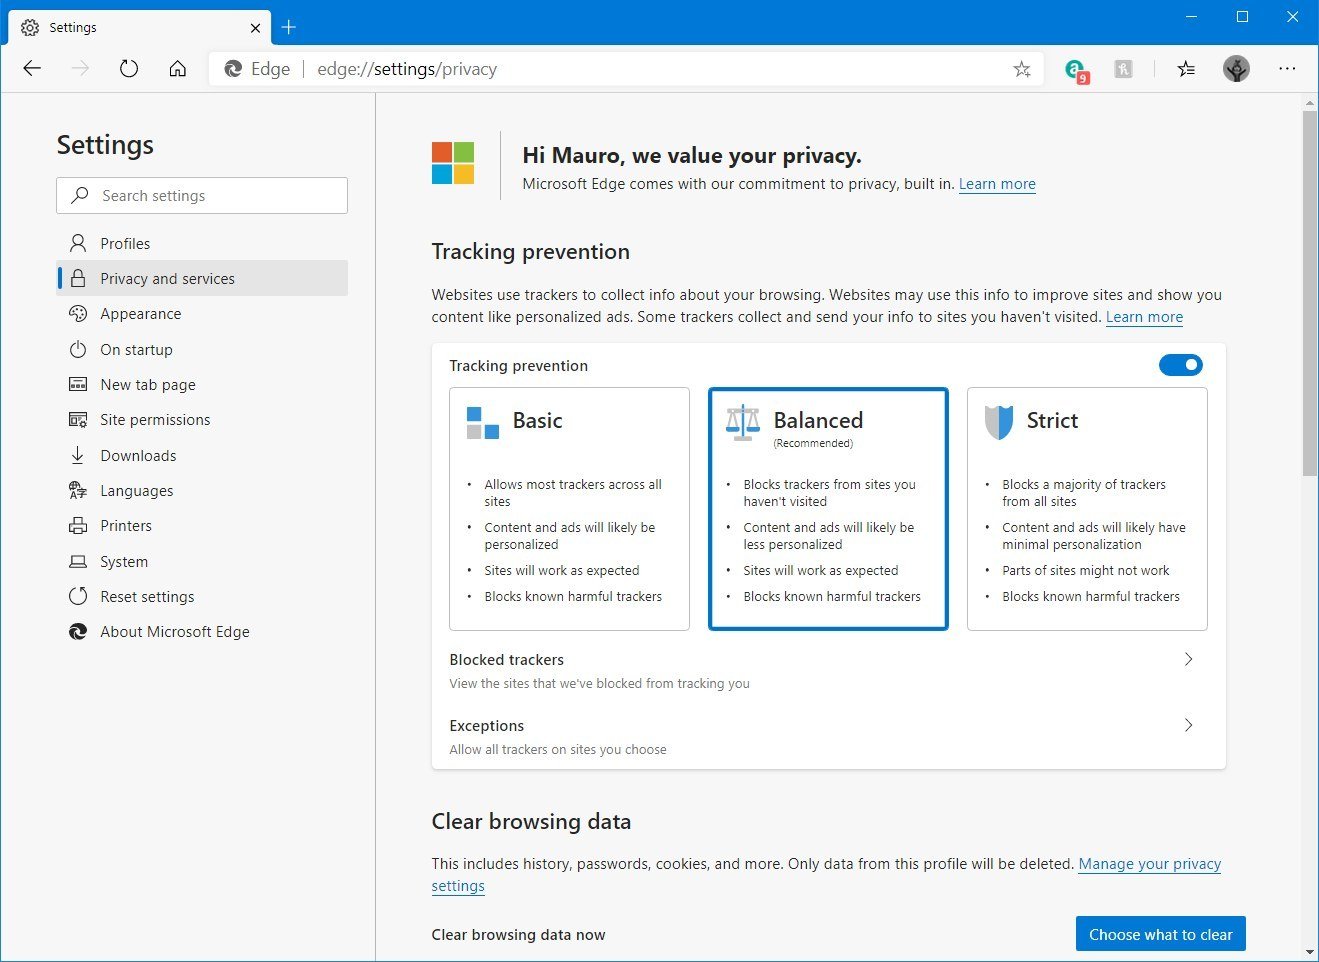 Microsoft Edge Chromium privacy and services settings